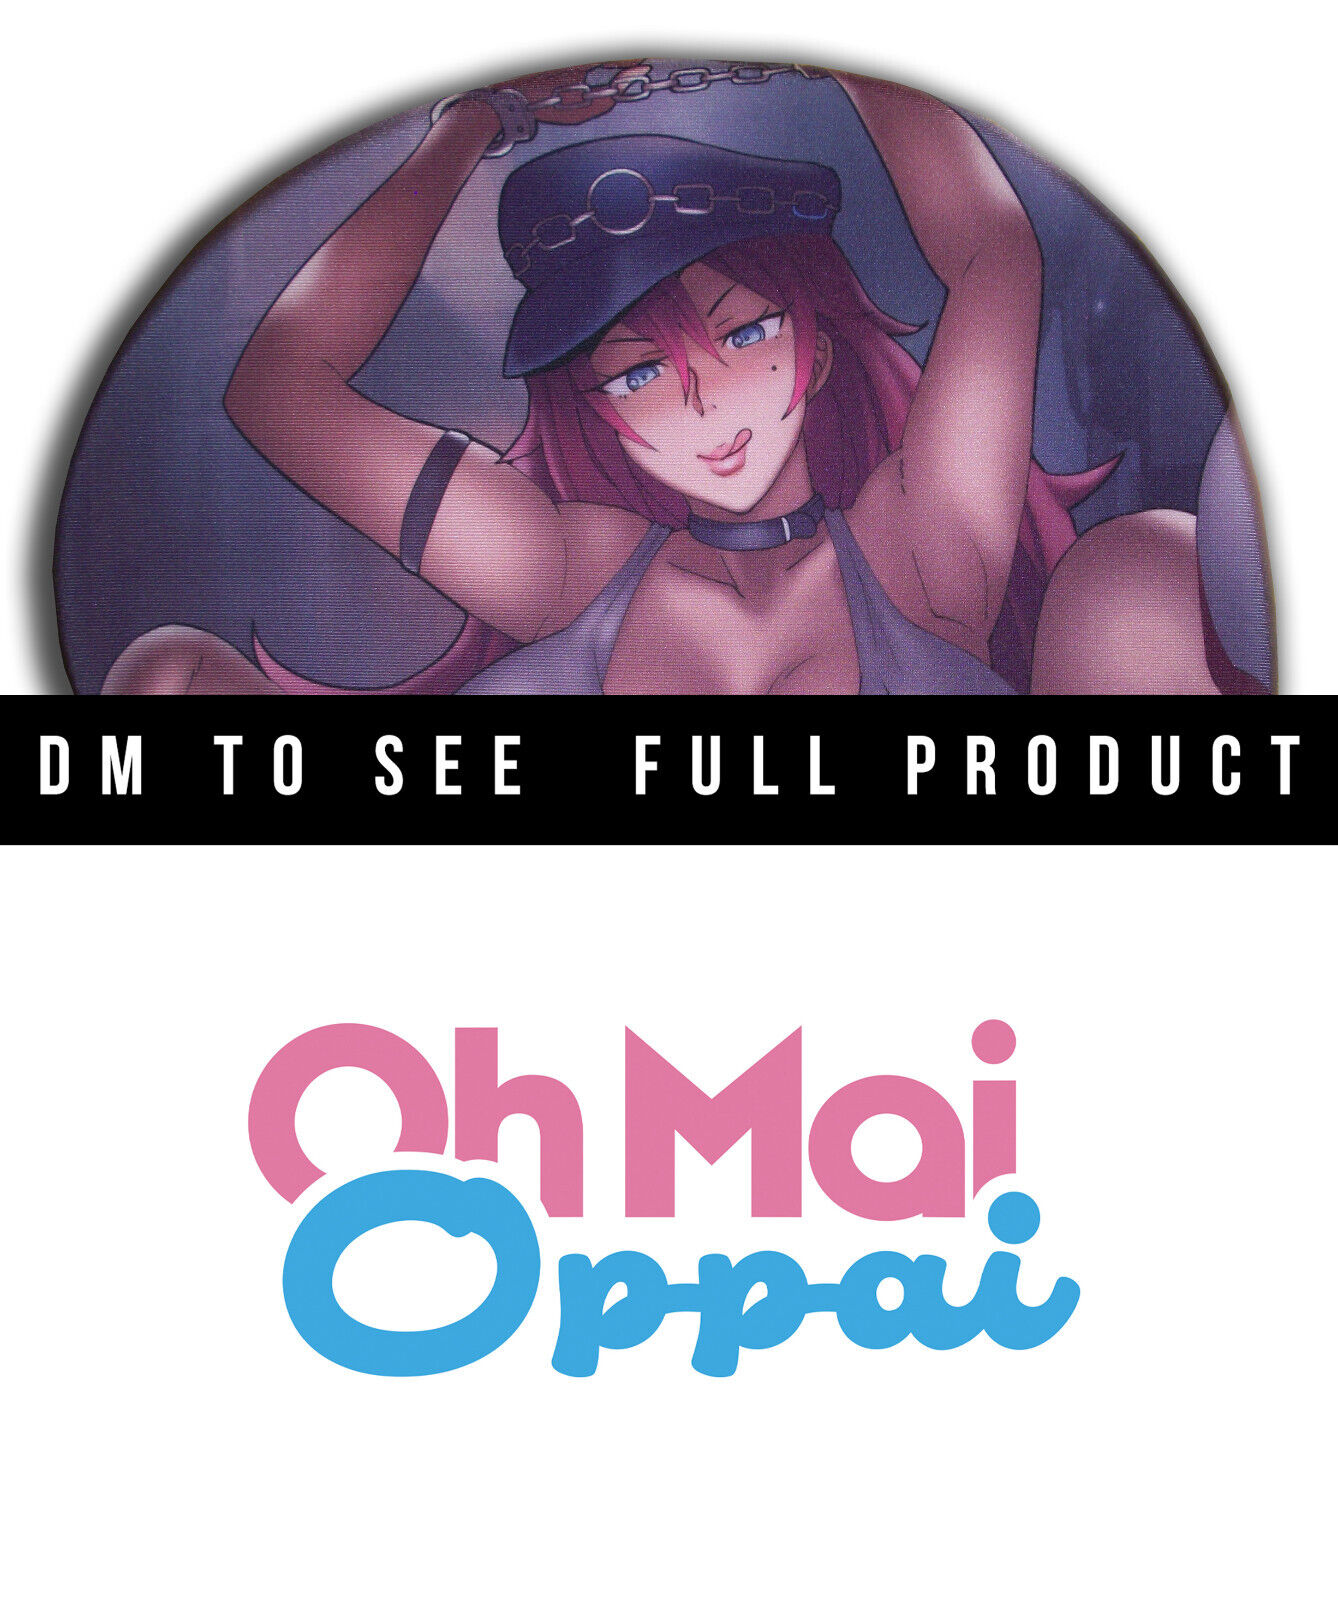 Poison from Street Fighter and Final Fight Oppai Bulge Mousepad